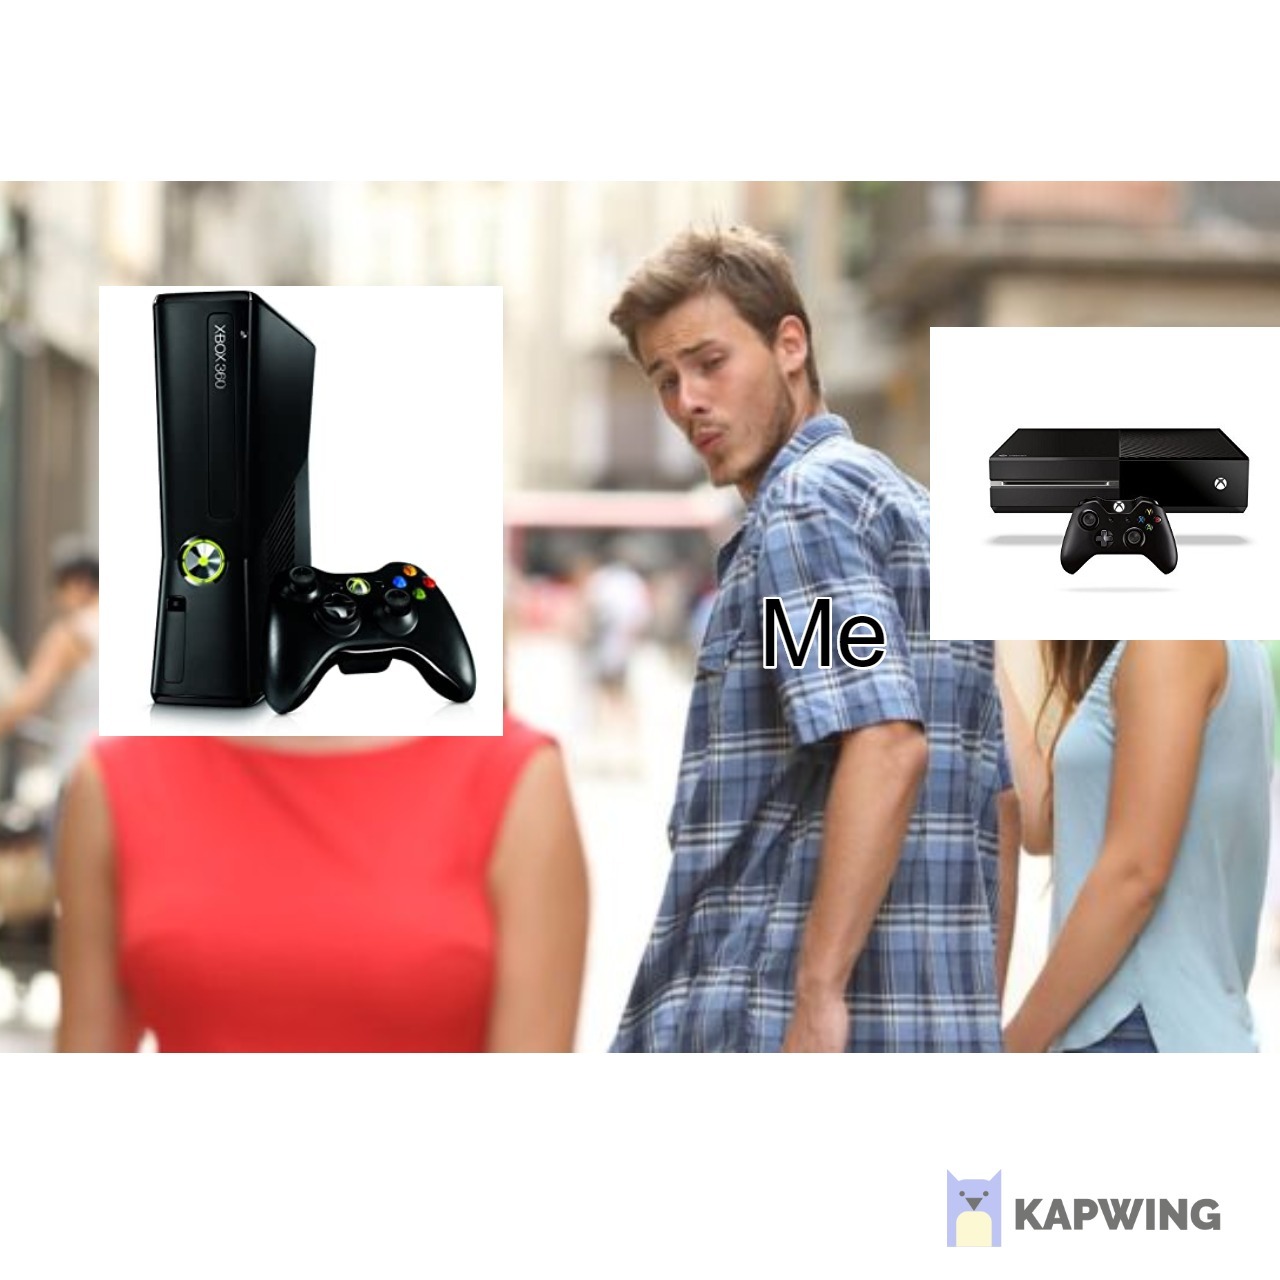 Everyone when we first saw they Xbox One Show case - meme